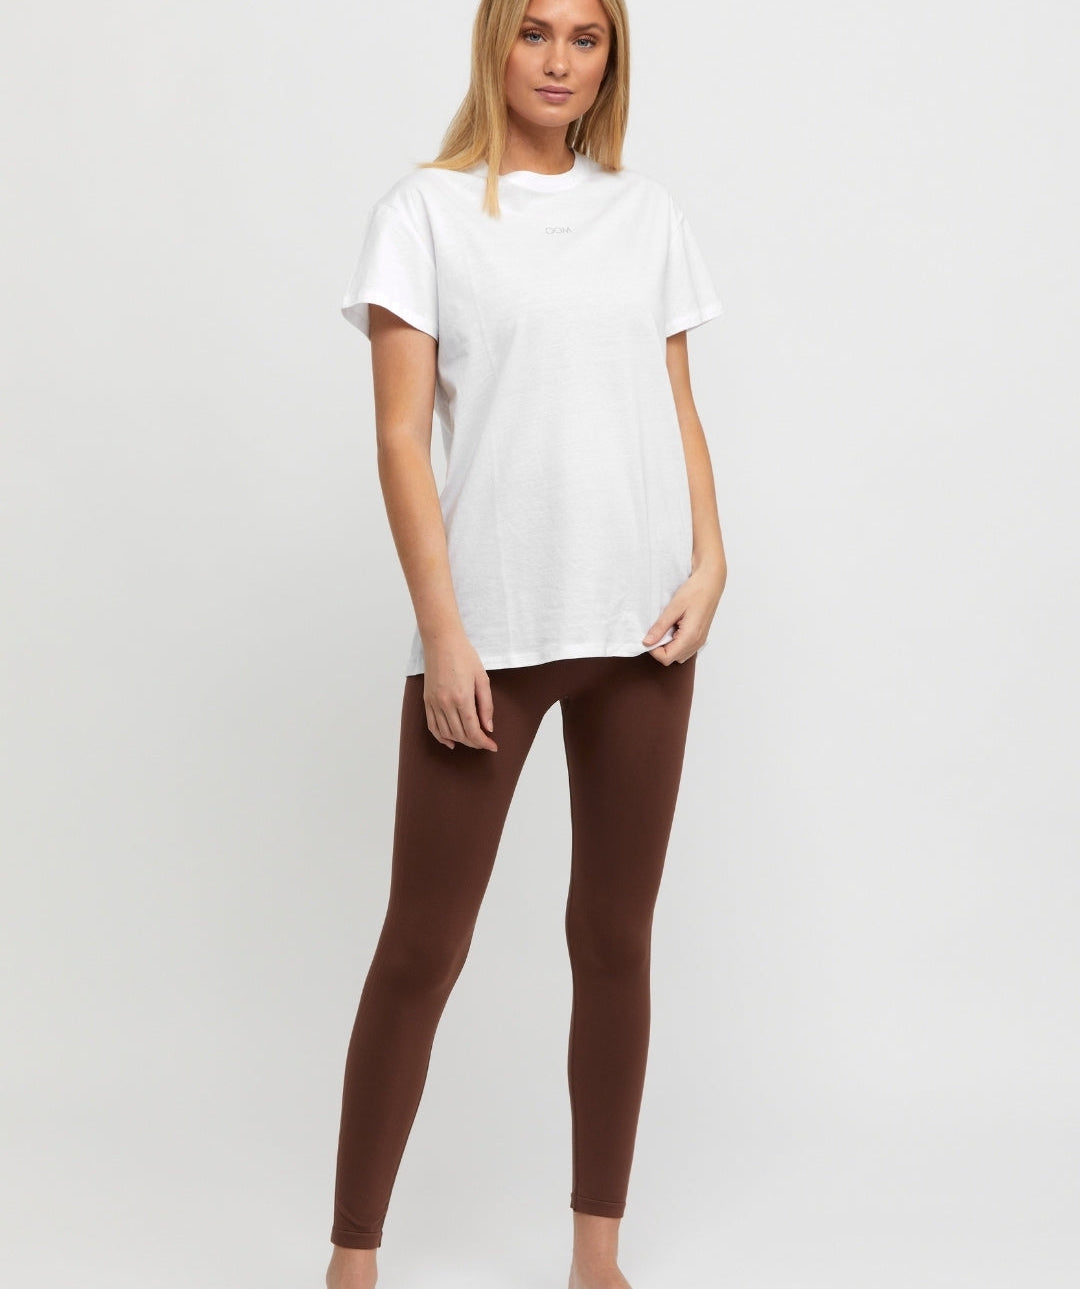 Drop of Mindfulness - Louise T-shirt (White)